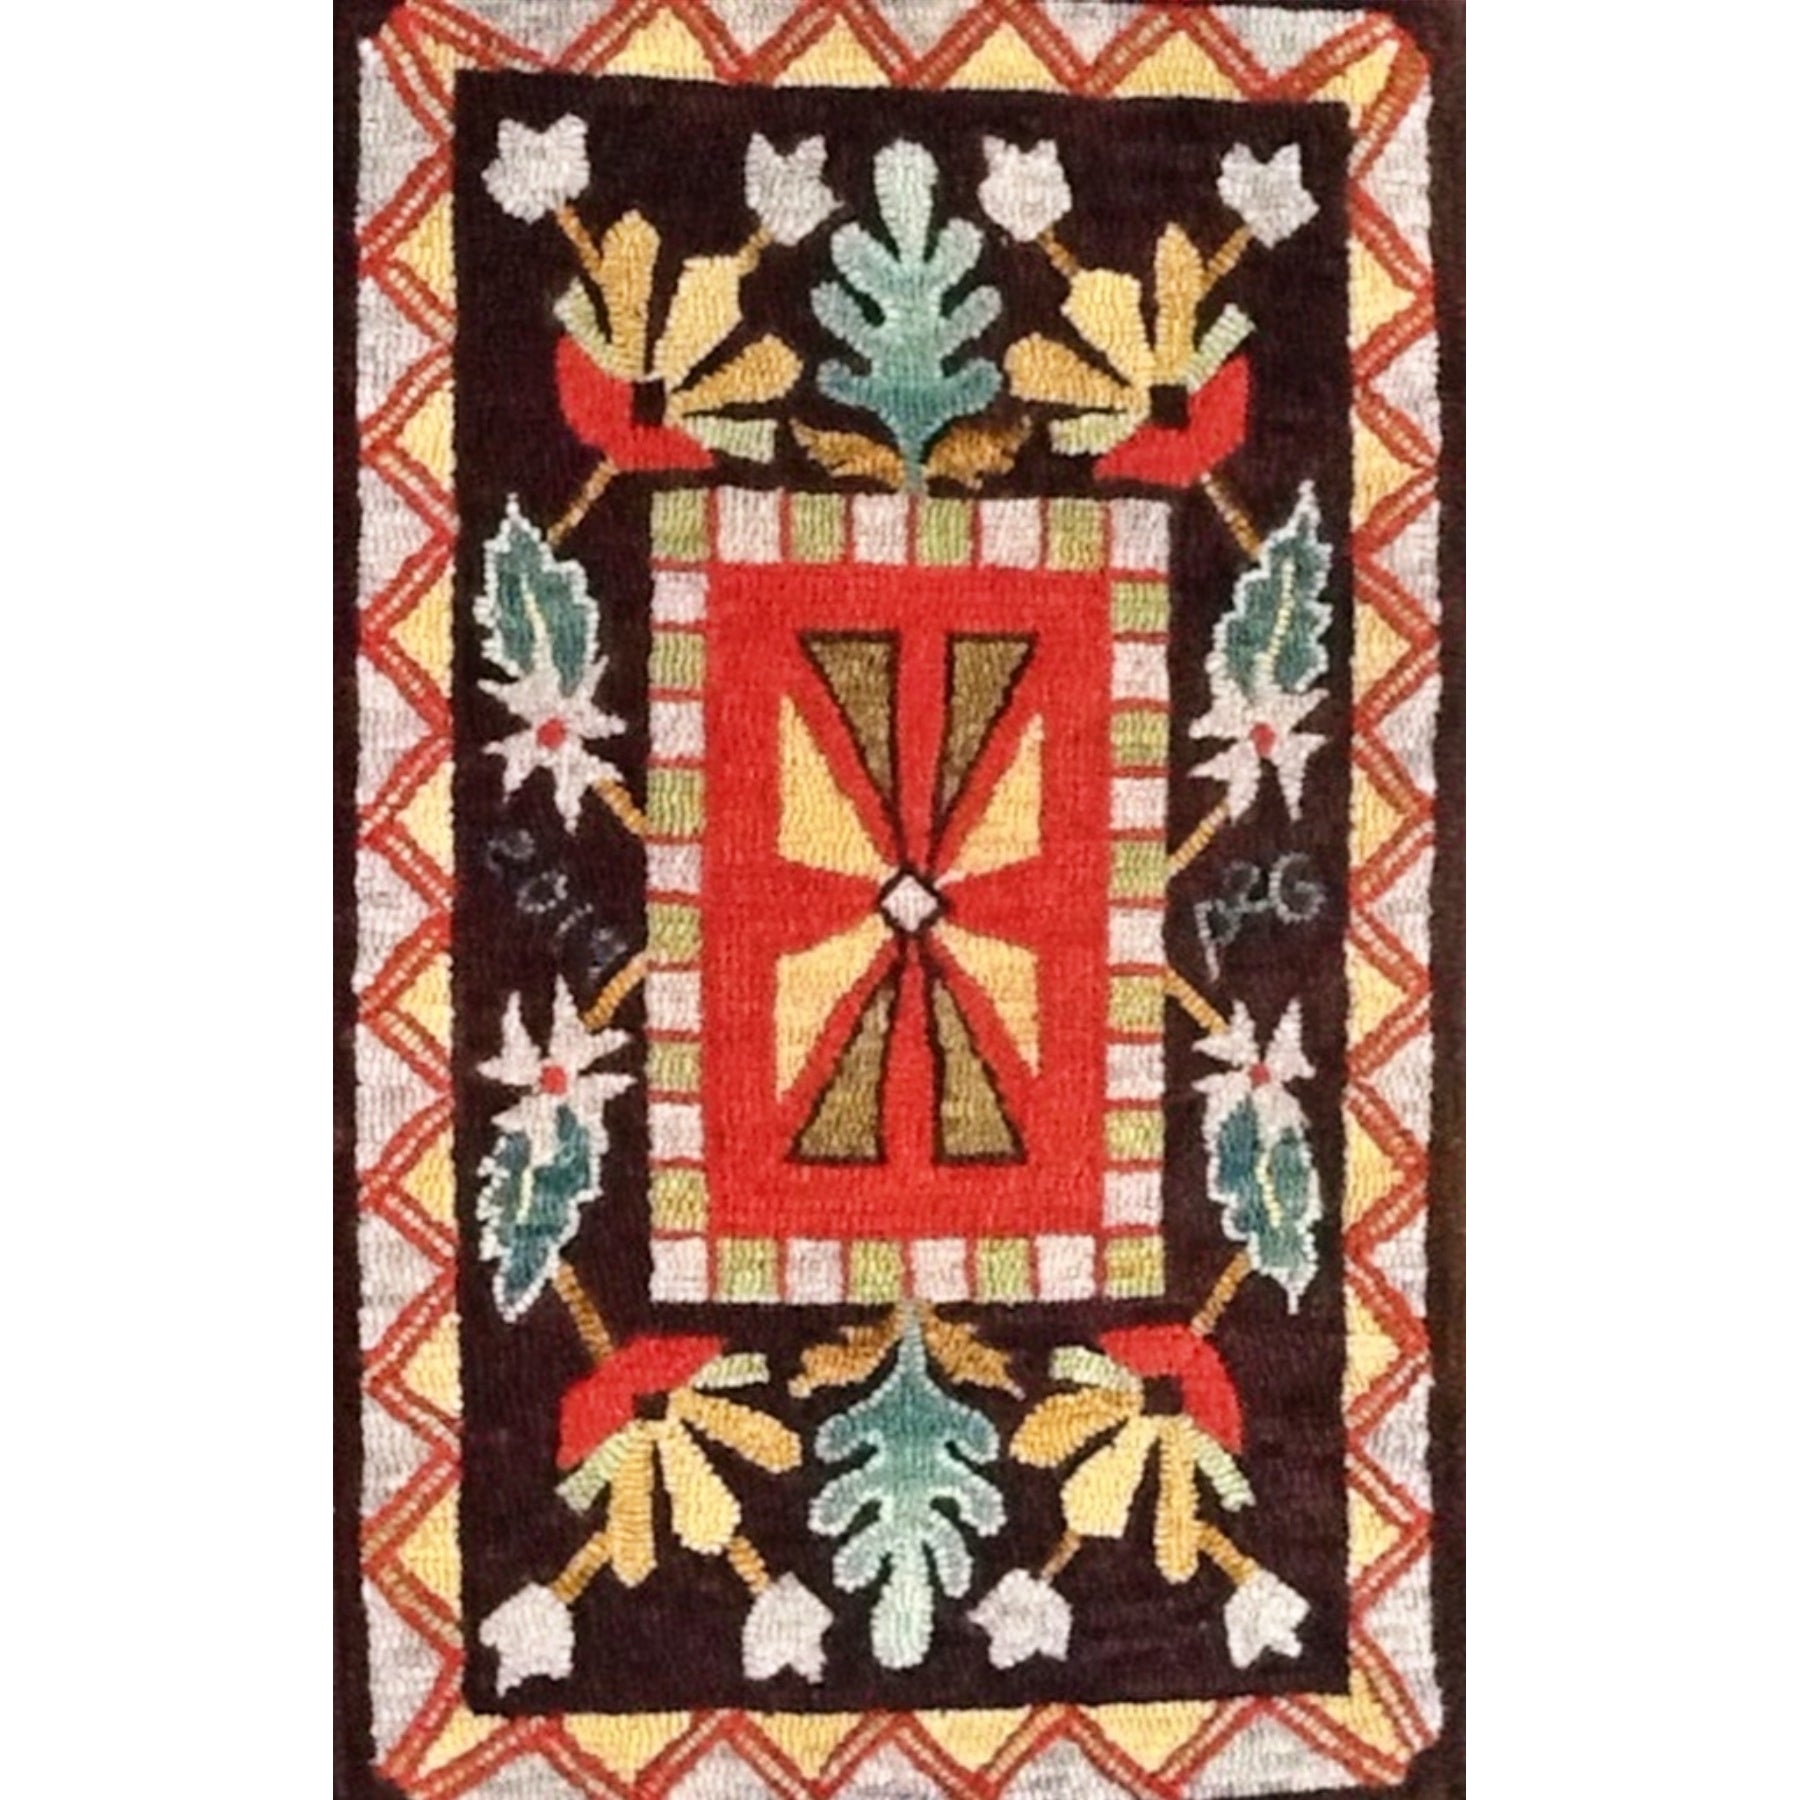 Beshir, rug hooked by Patty Groth